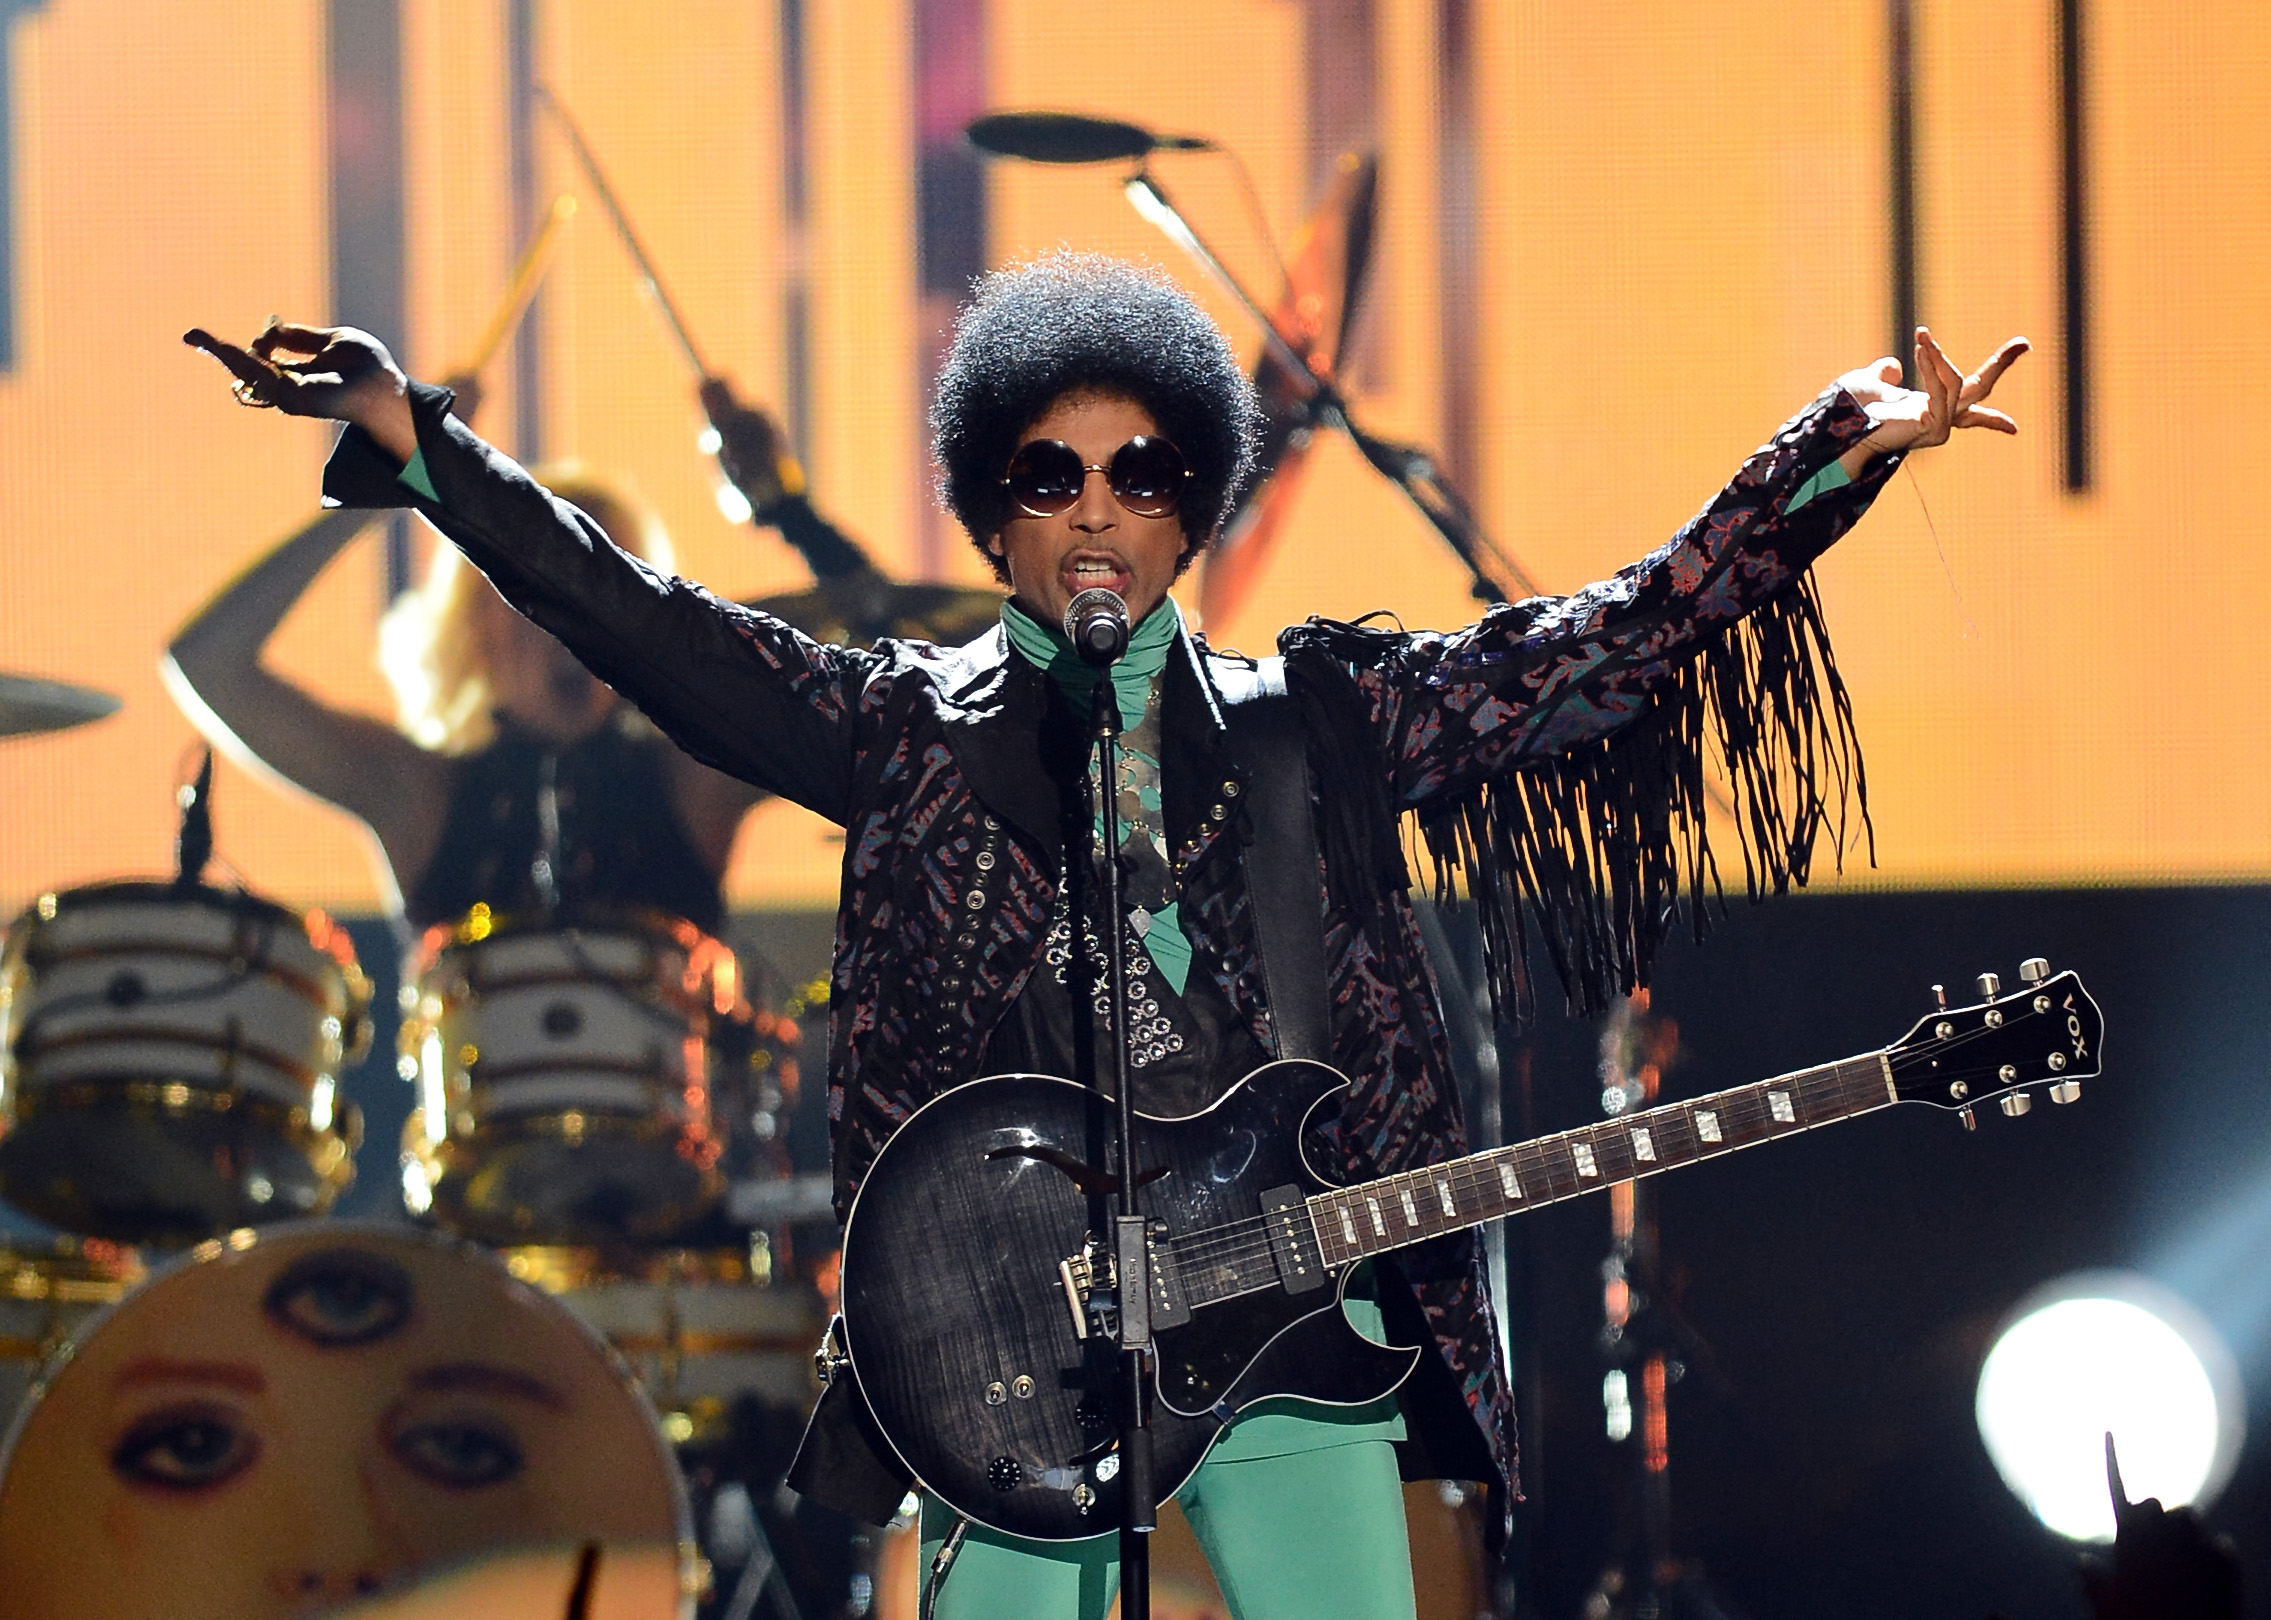 Prince performed at a private White House dance party last weekend